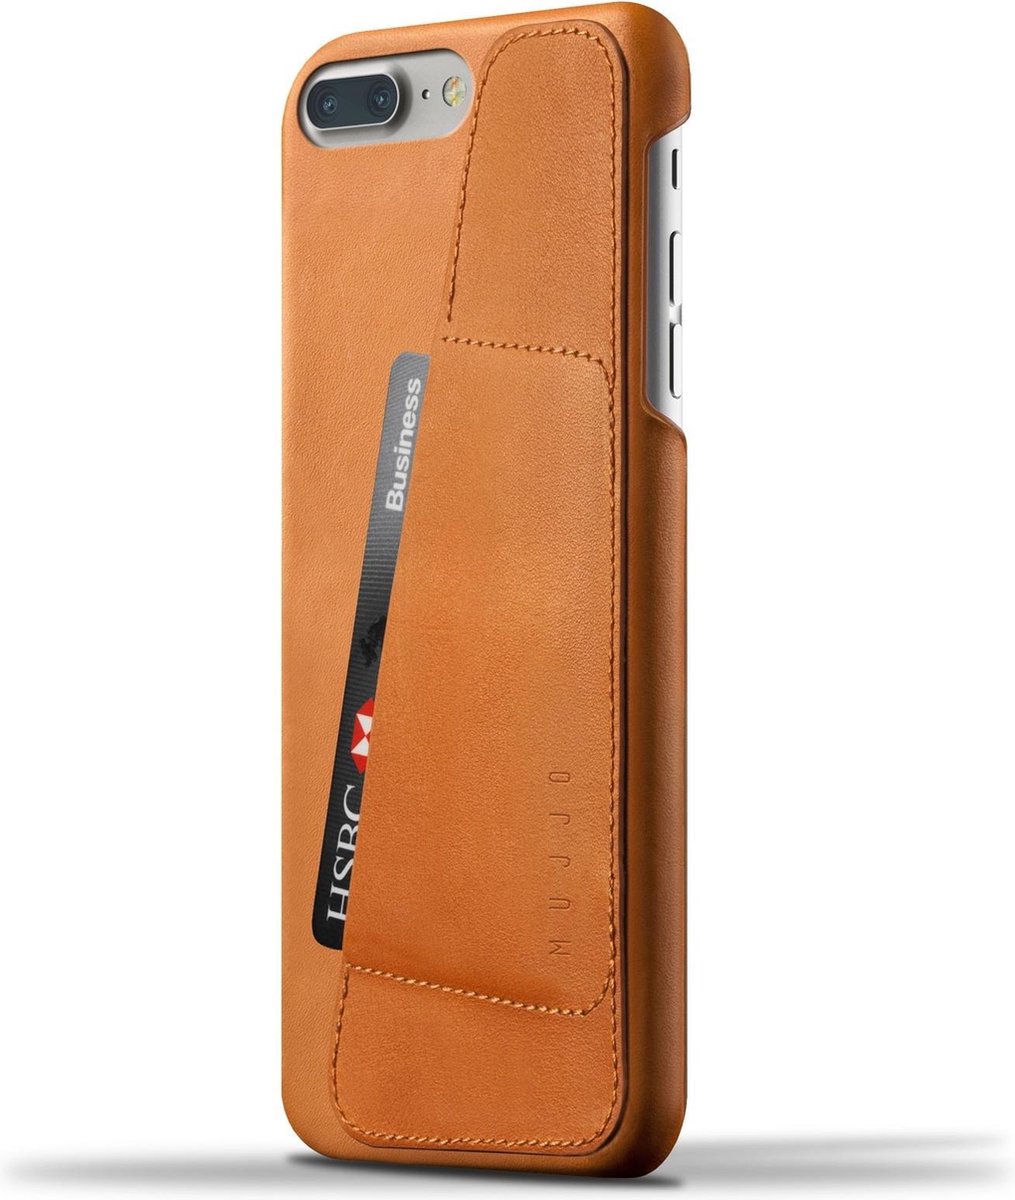 Mujjo Leather Wallet Case for iPhone 7+ Tan